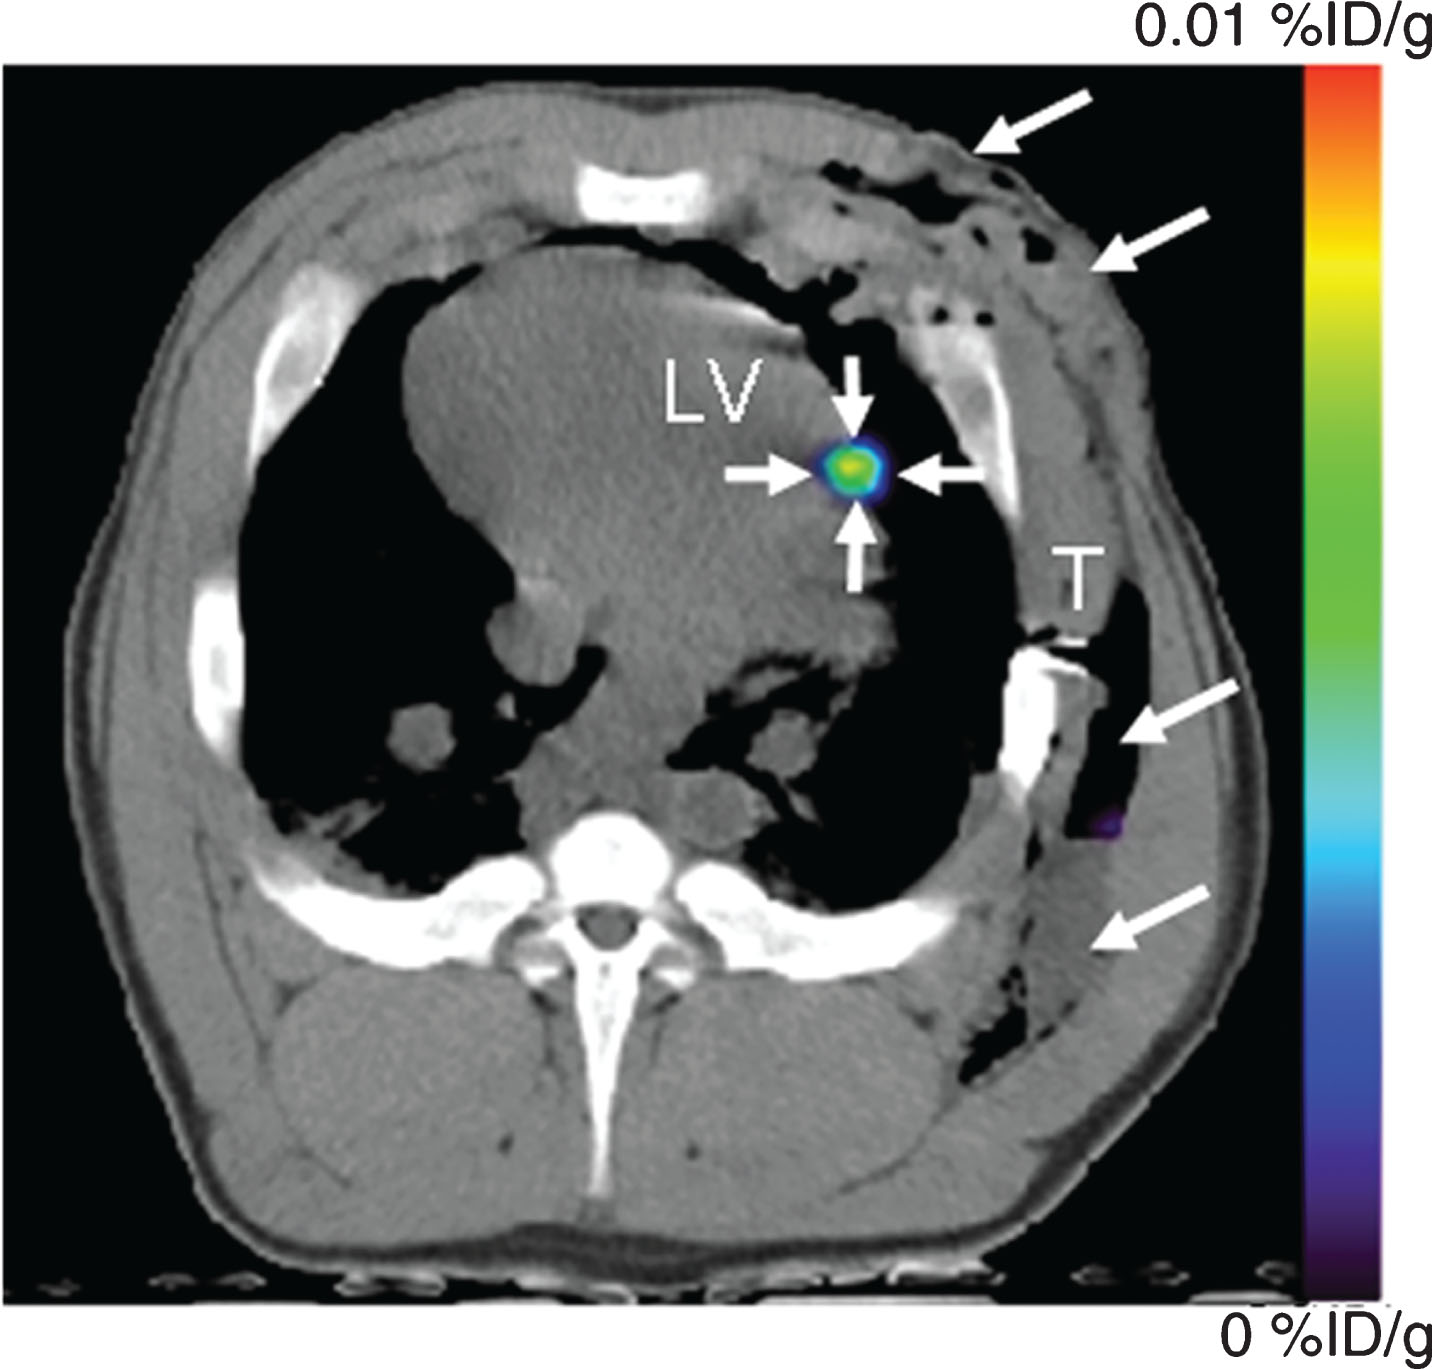 PET-CT imaging of intramyocardial reporter gene expression in swine. (a) Transverse nonenhanced PET-CT fusion image reconstructed at the level of the left ventricle (LV) after direct open-chest administration of transduced human MSCs. The image was acquired 4 hours after intravenous FHBG administration. A distinct imaging signal (small arrows) can be delineated at the intramyocardial injection site of human MSCs. Note postoperative soft-tissue edema, emphysema, and fluid collection in the left chest wall (large arrows). T = beveled part of chest tube. Reprinted from Willmann J, et al. Imaging Gene Expression in Human Mesenchymal Stem Cells: From Small to Large Animals. Radiology 2009 Jul;252(1):117-27 with permission.